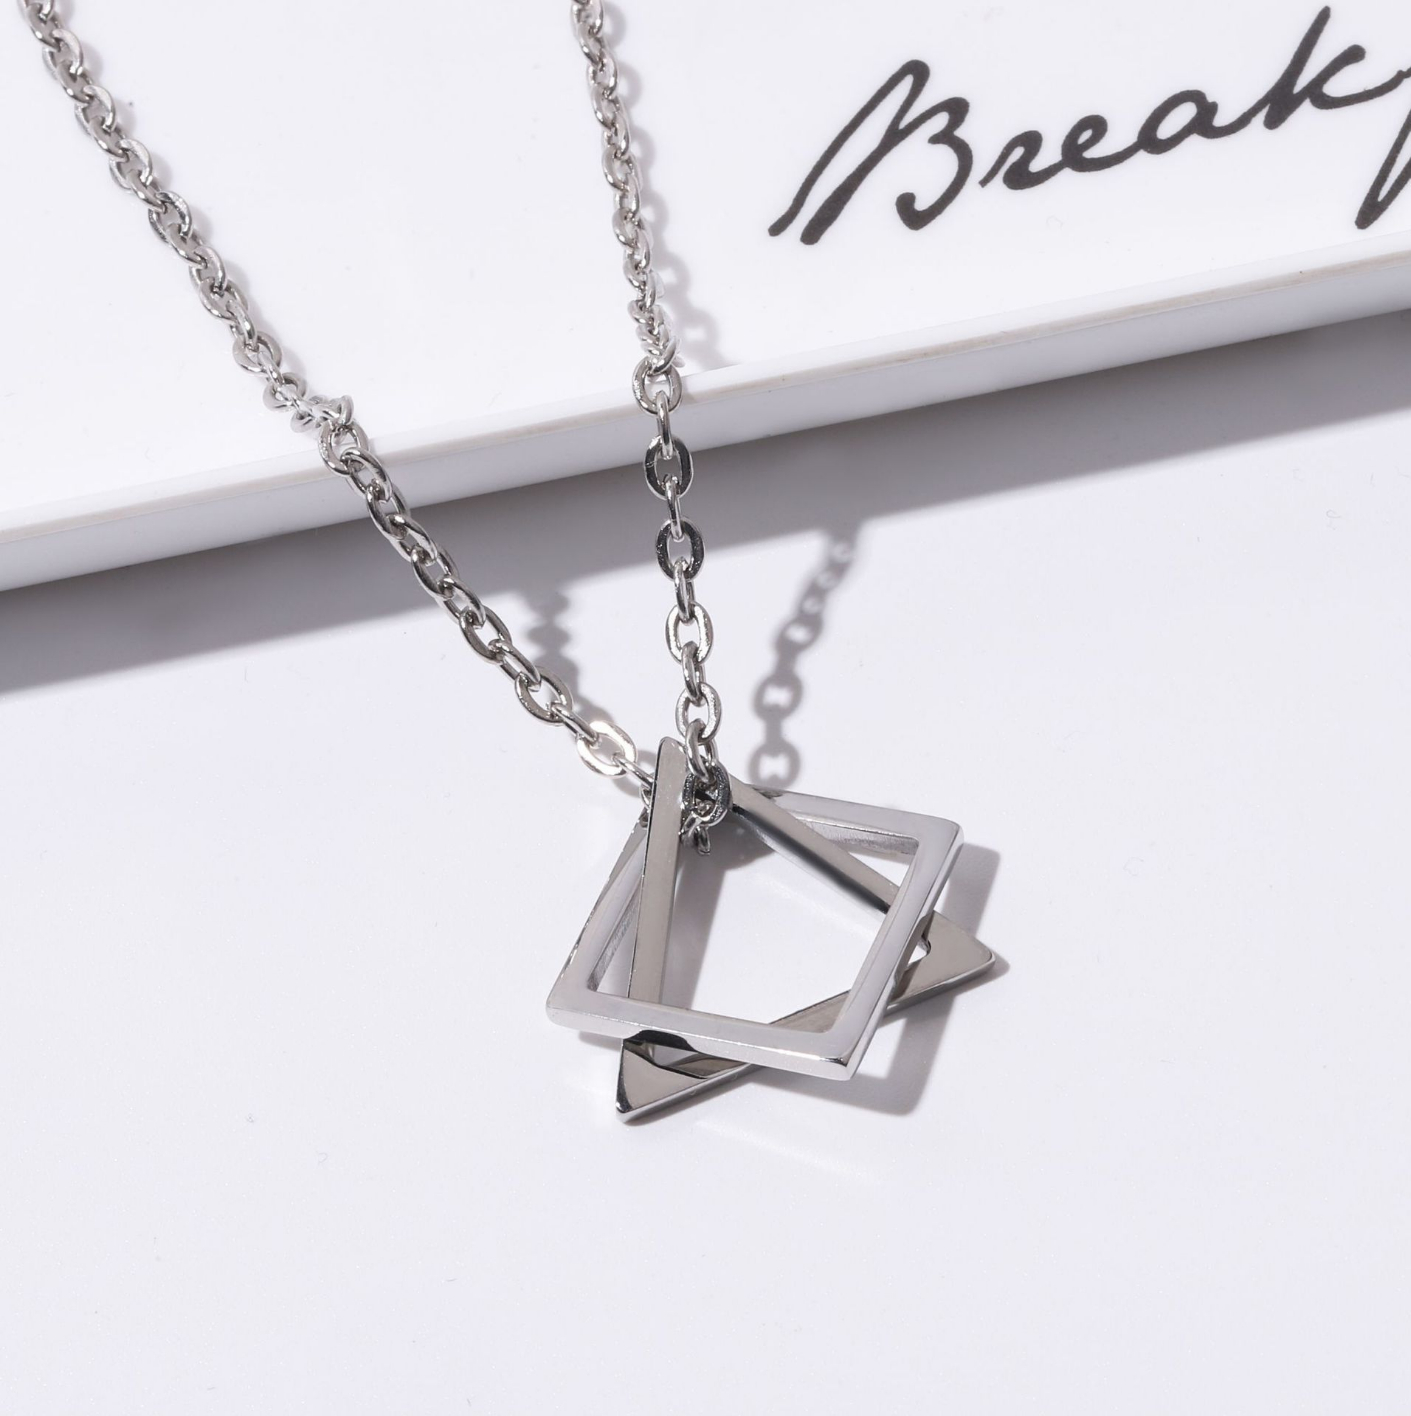 Solid Stainless Steel Triangle And Square Extension Pendant Necklace Charm Chain Secure Lobster Lock Clasp Necklace For Men